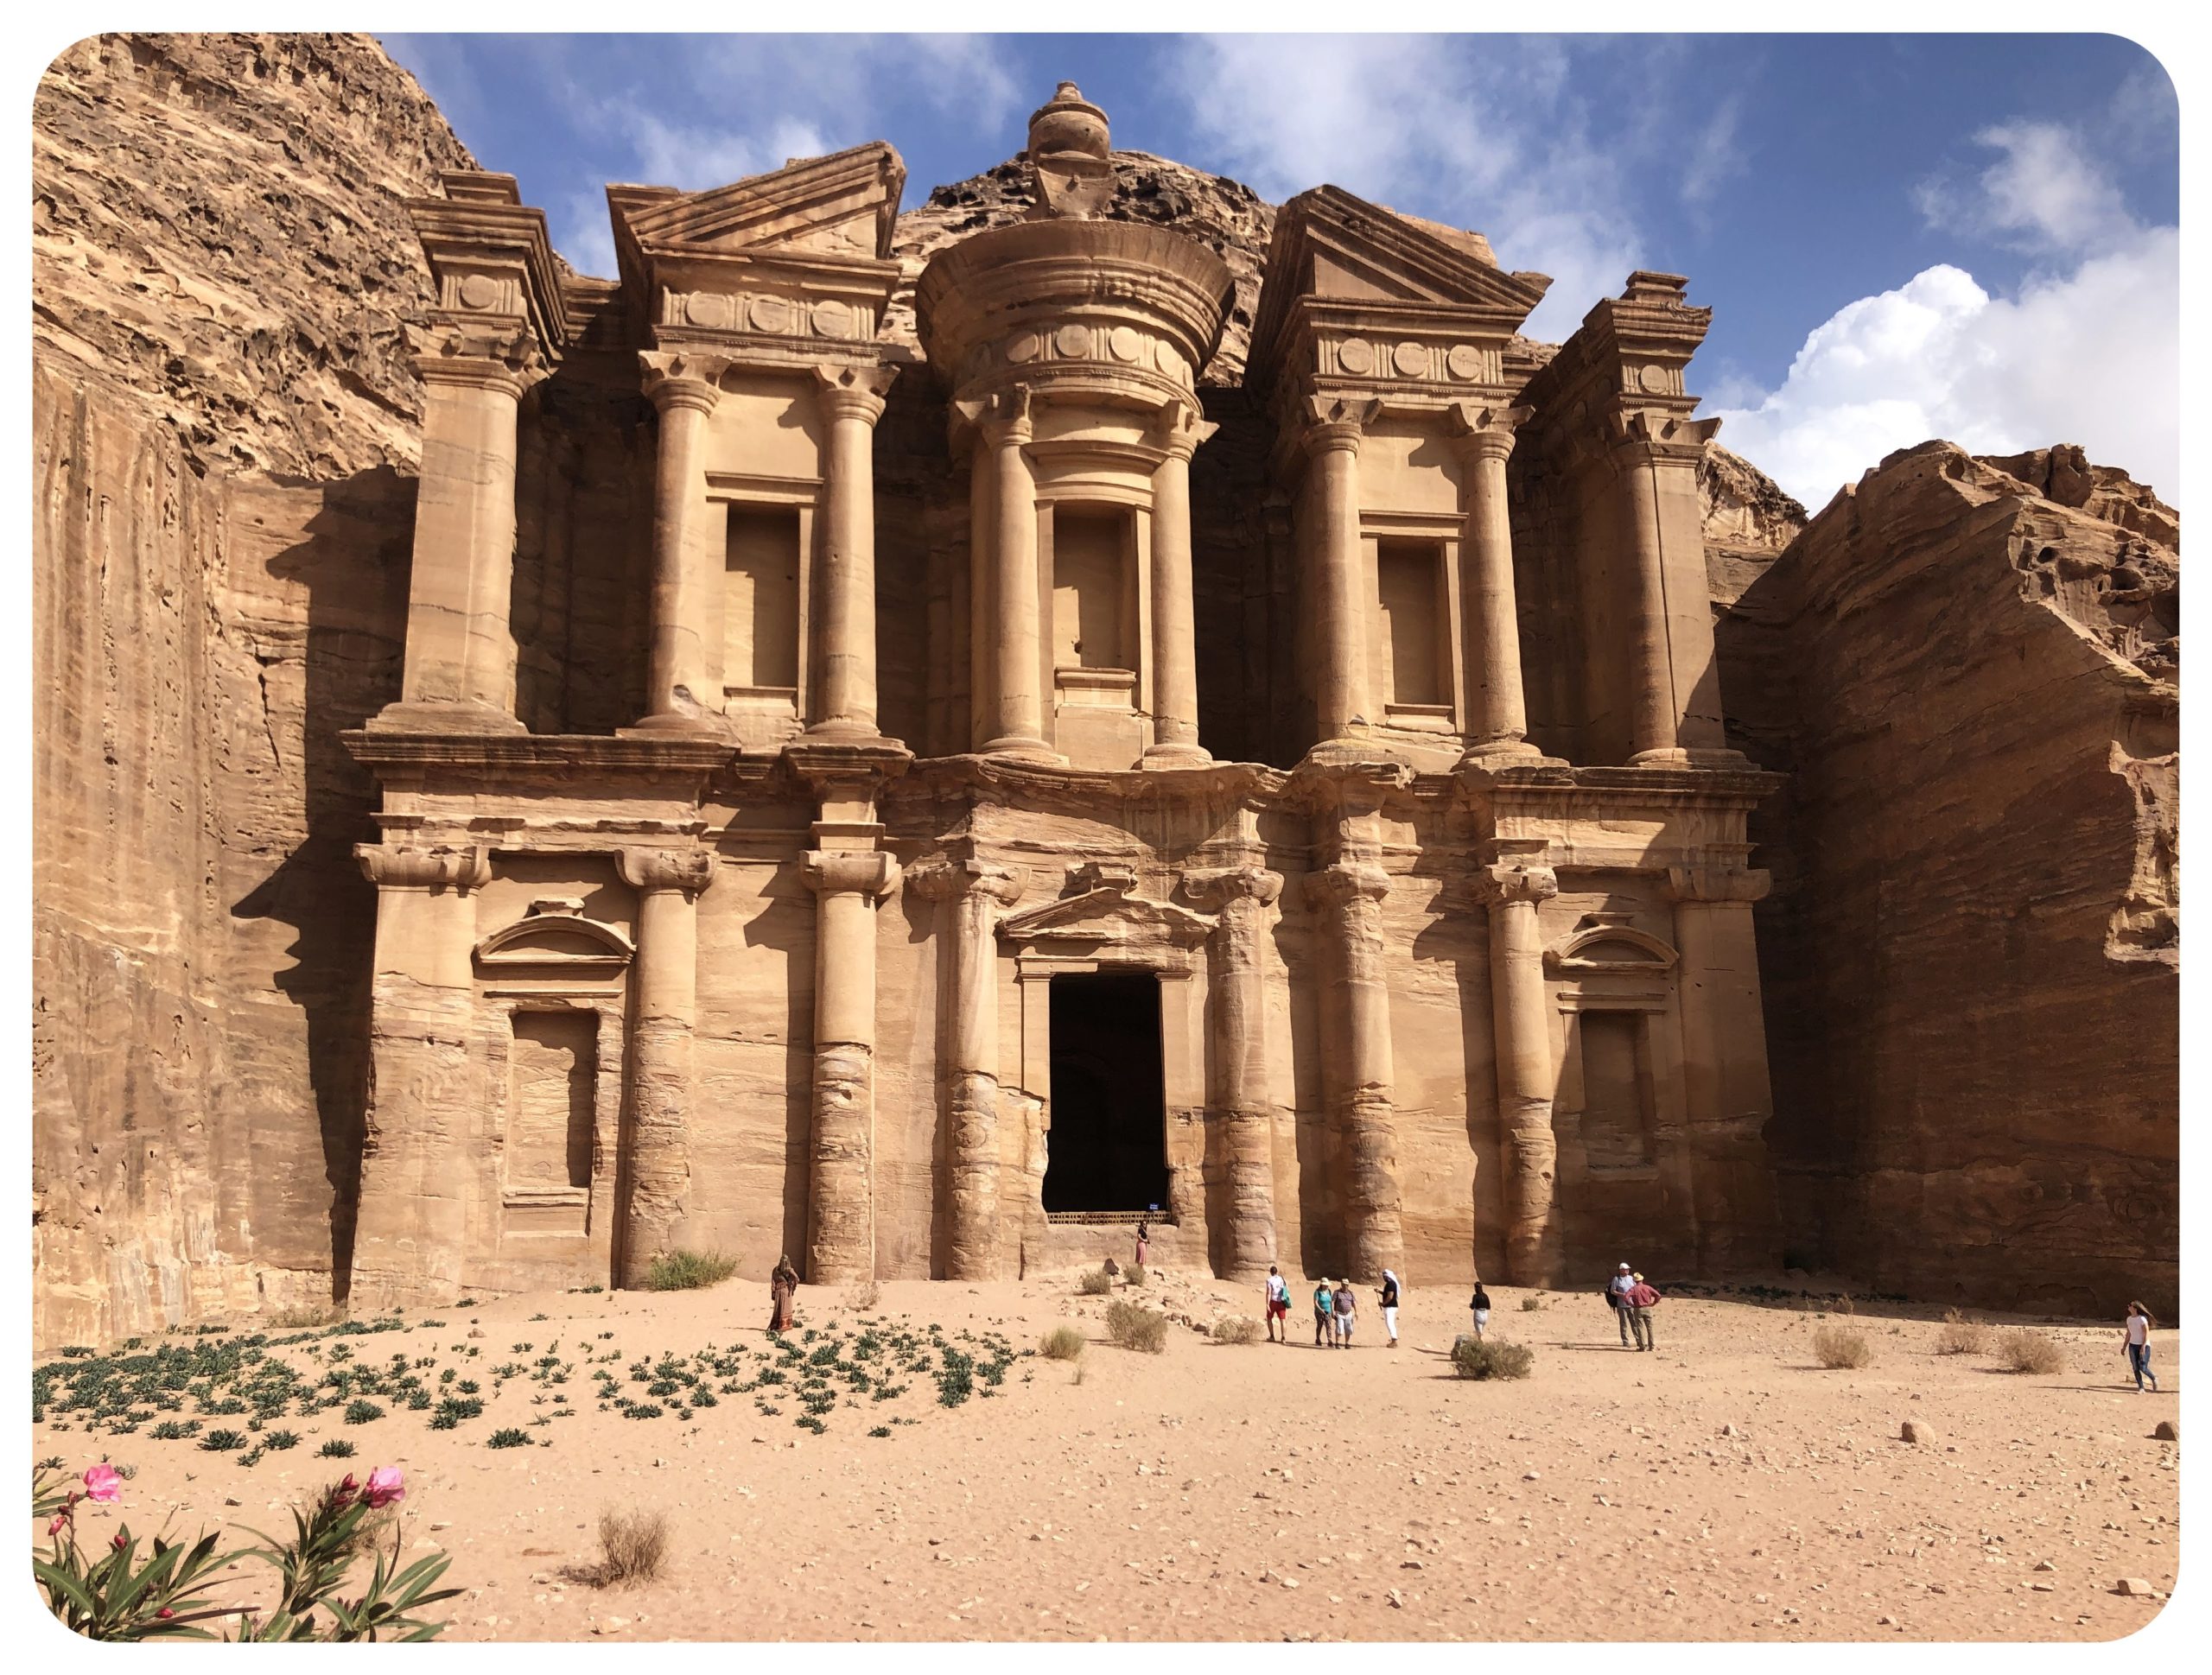 From Jerusalem to Petra: A Solo Traveler’s Experience